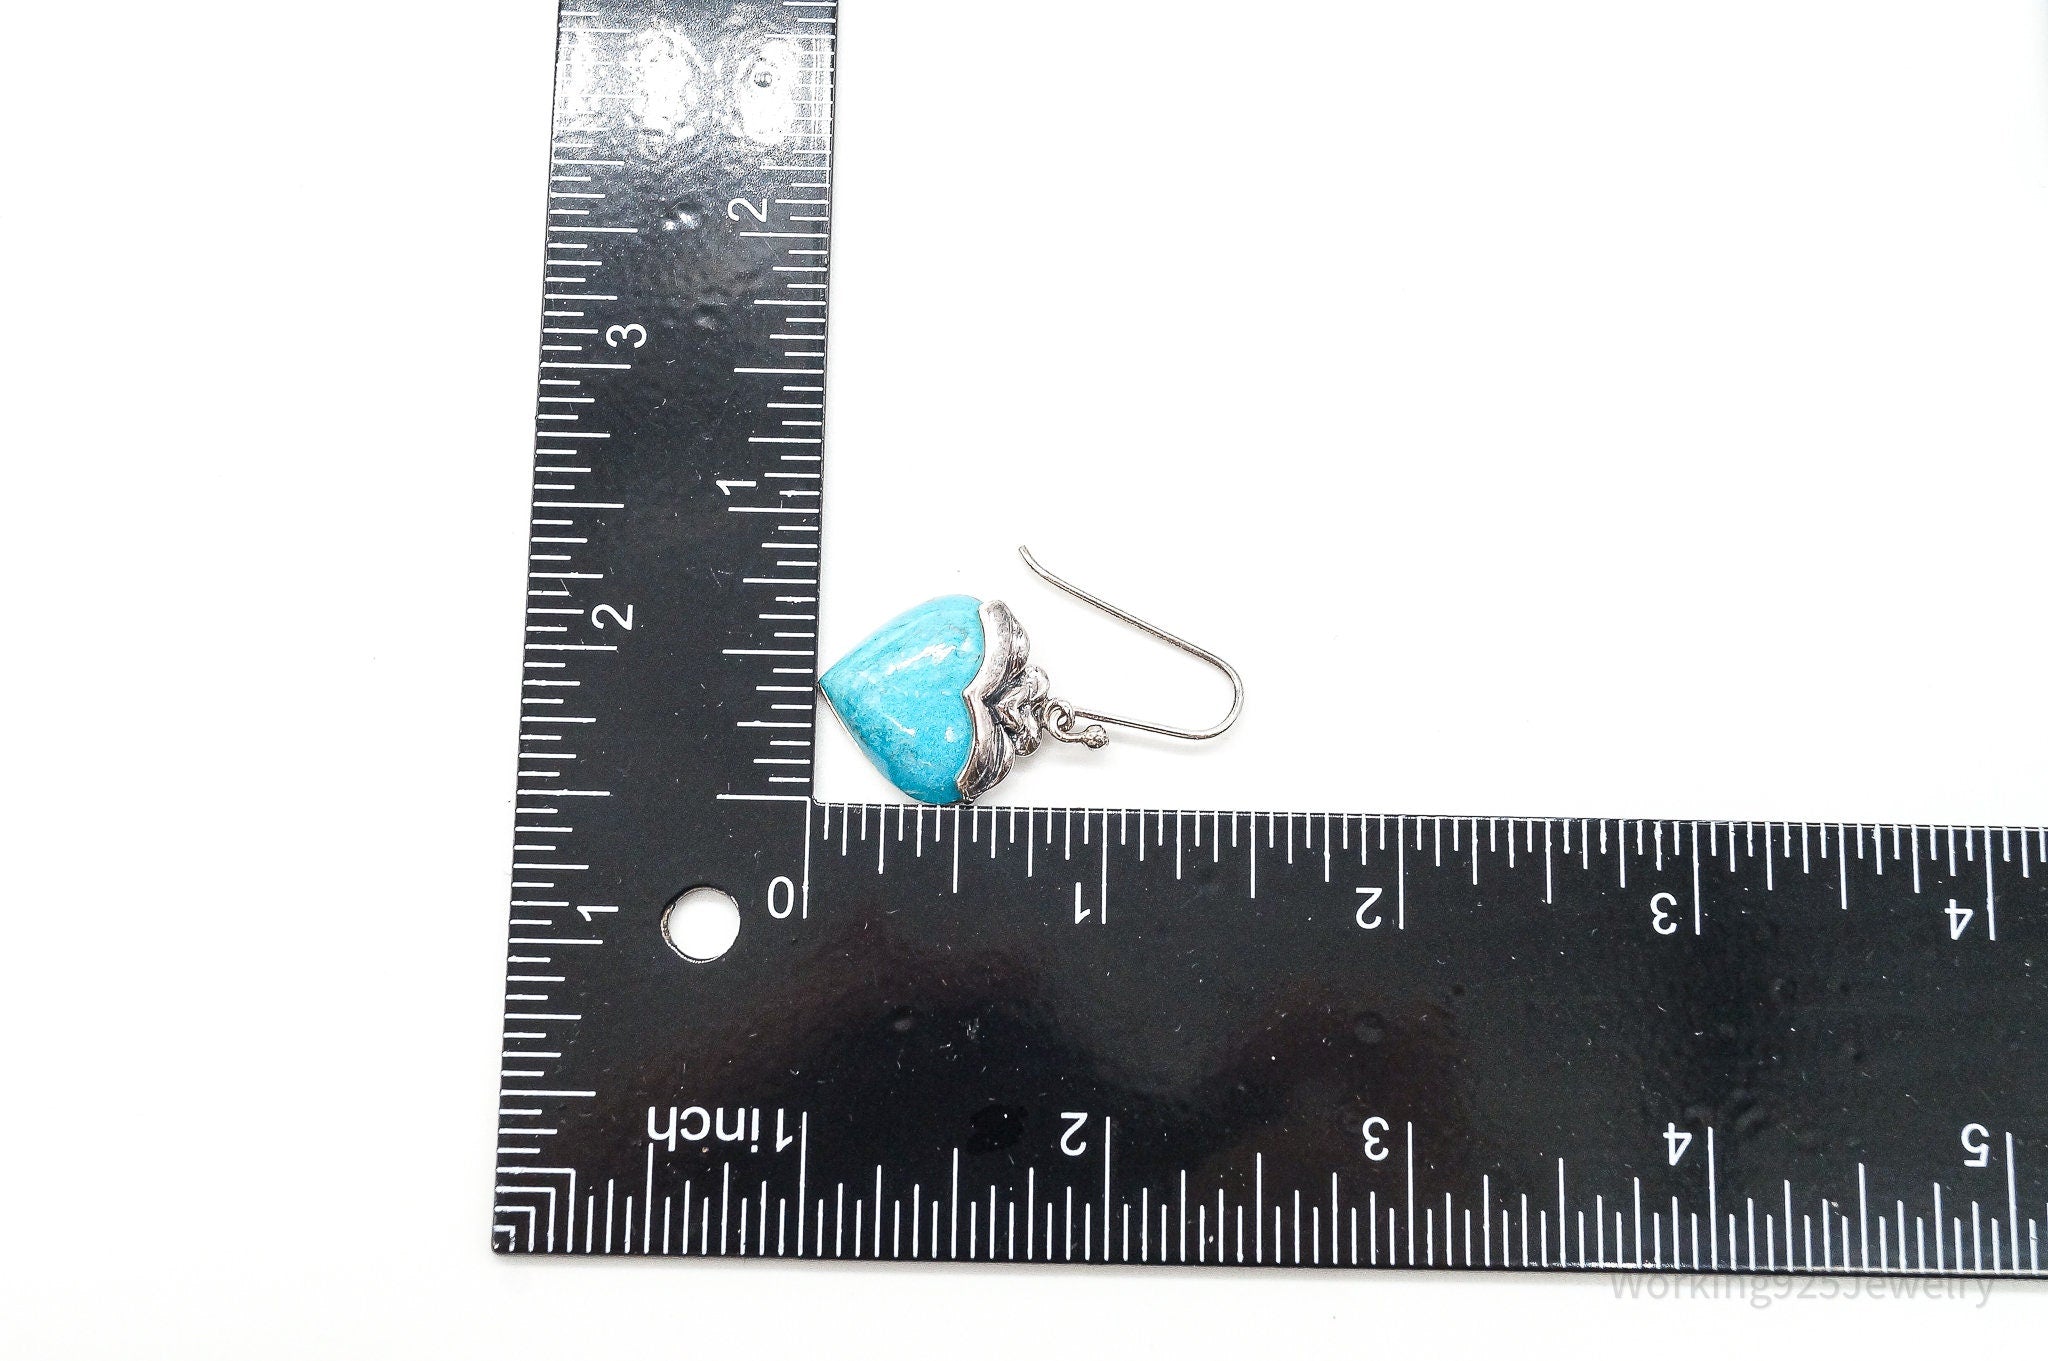 Designer SX Turquoise Hearts Sterling Silver Earrings